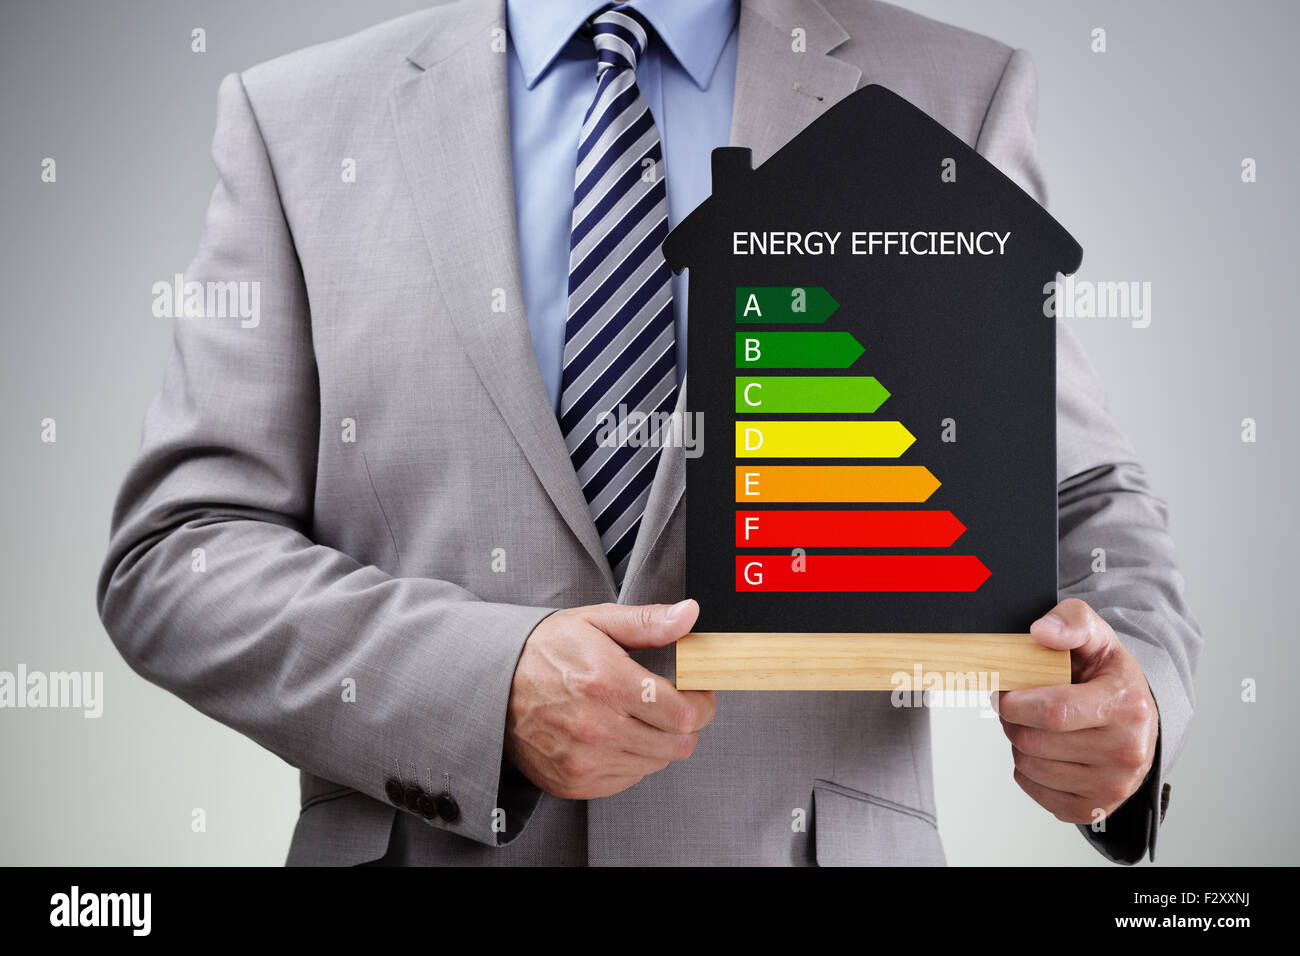 Businessman holding house shape blackboard with chalk energy efficiency rating chart concept for performance, efficiency and env Stock Photo